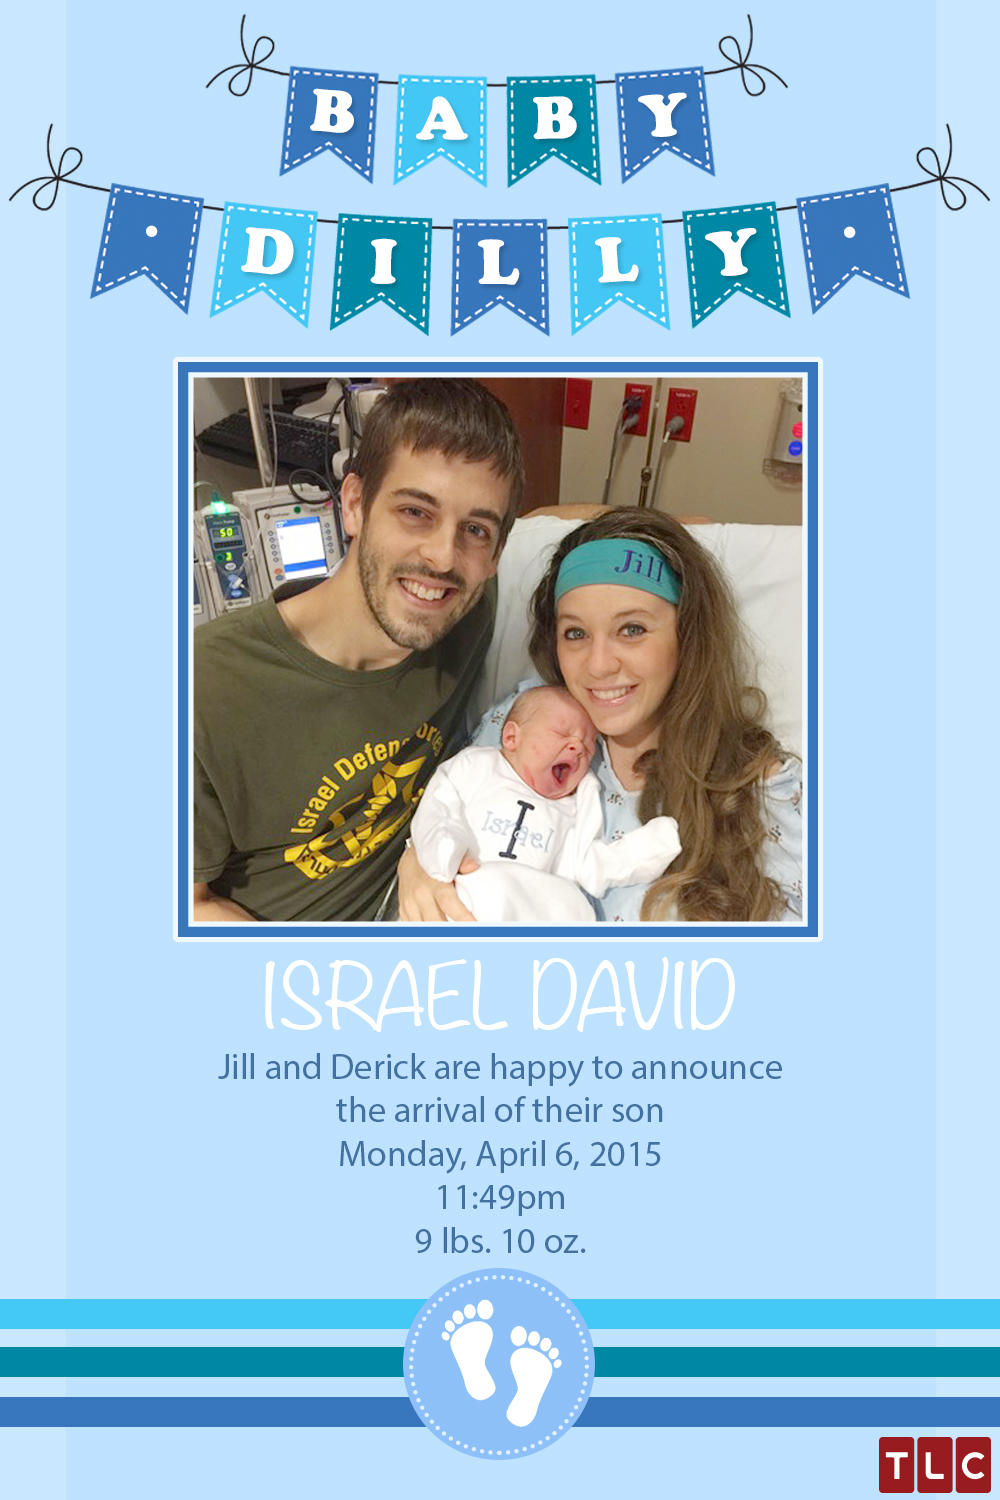 Jill and Derick Dillard Welcome Baby Dilly | 19 Kids and Counting ...